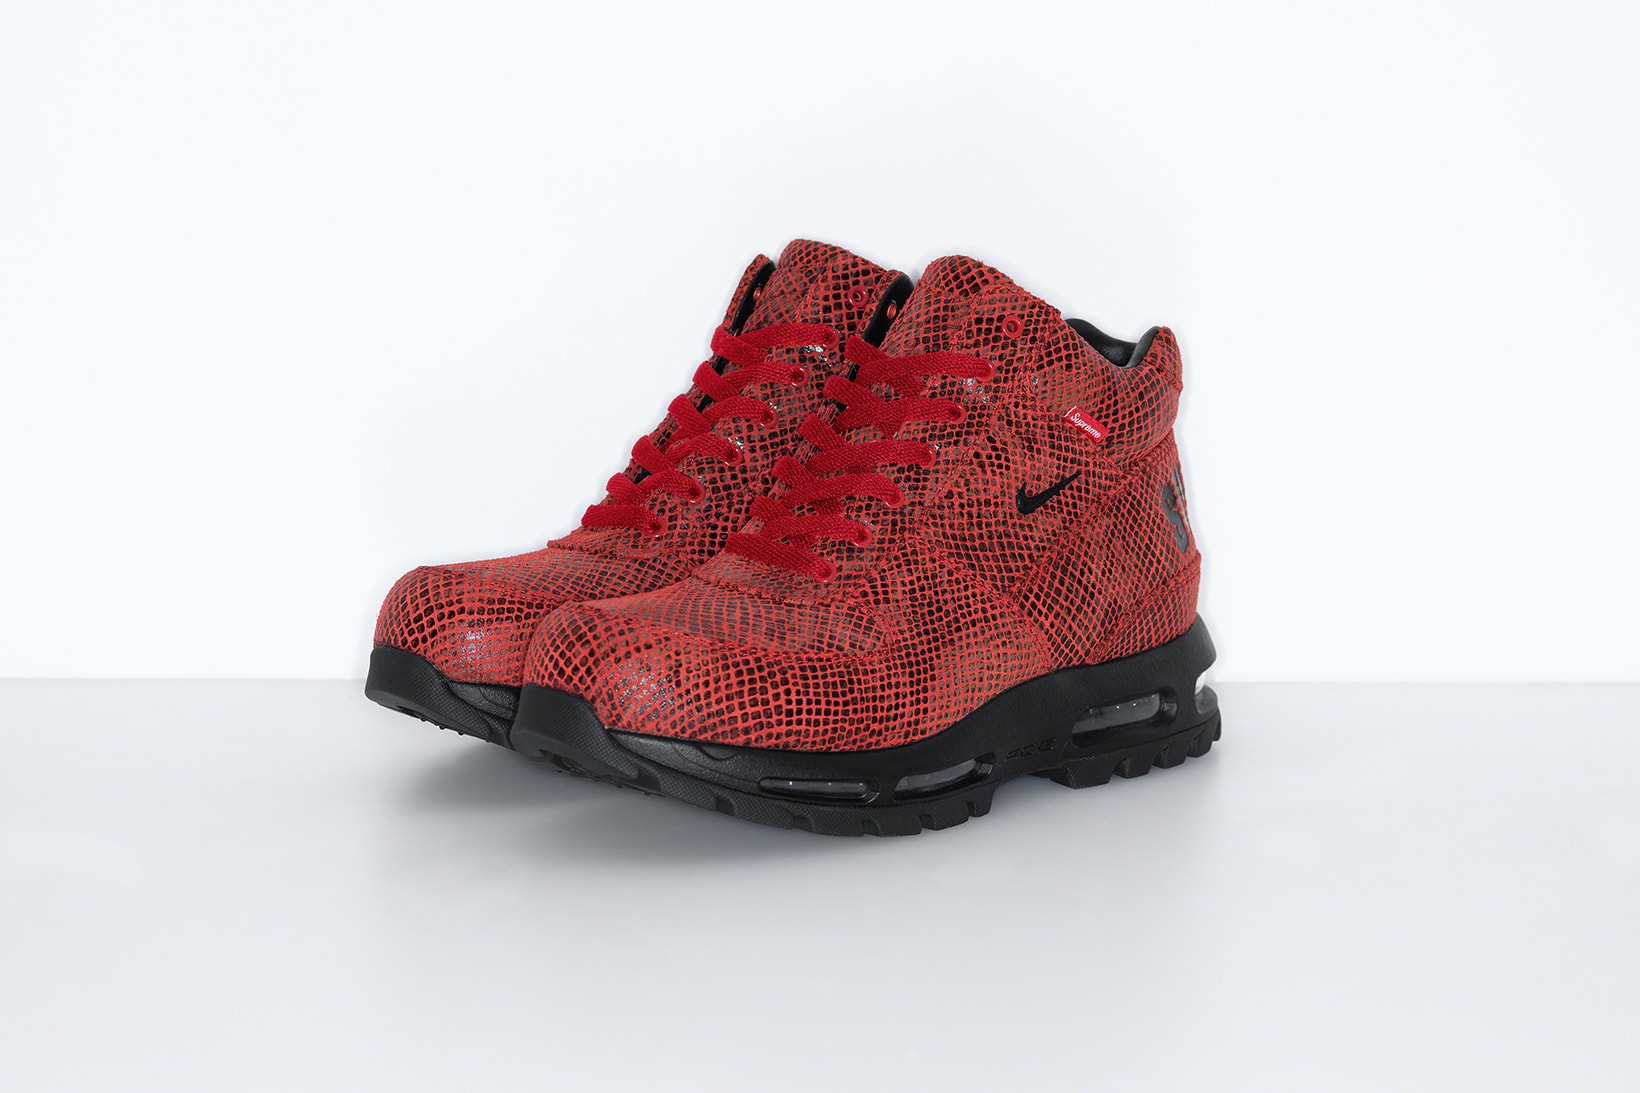 supreme nike goadome collaboration boots footwear shoes snakeskin red colorway black lateral laces